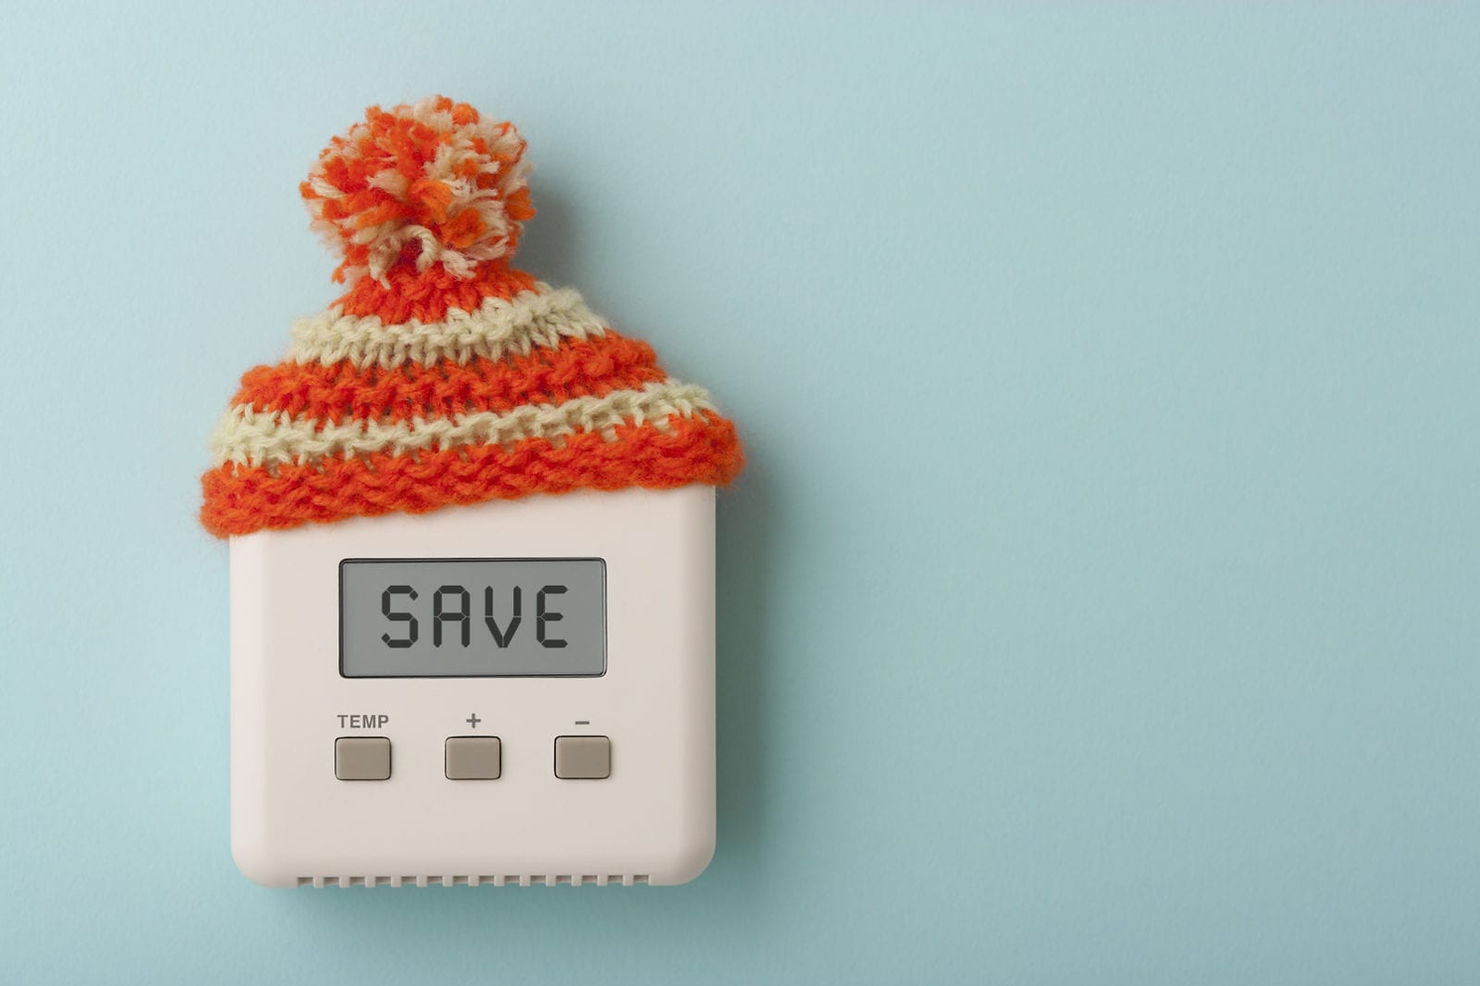 Thermostat with a knitted hat on